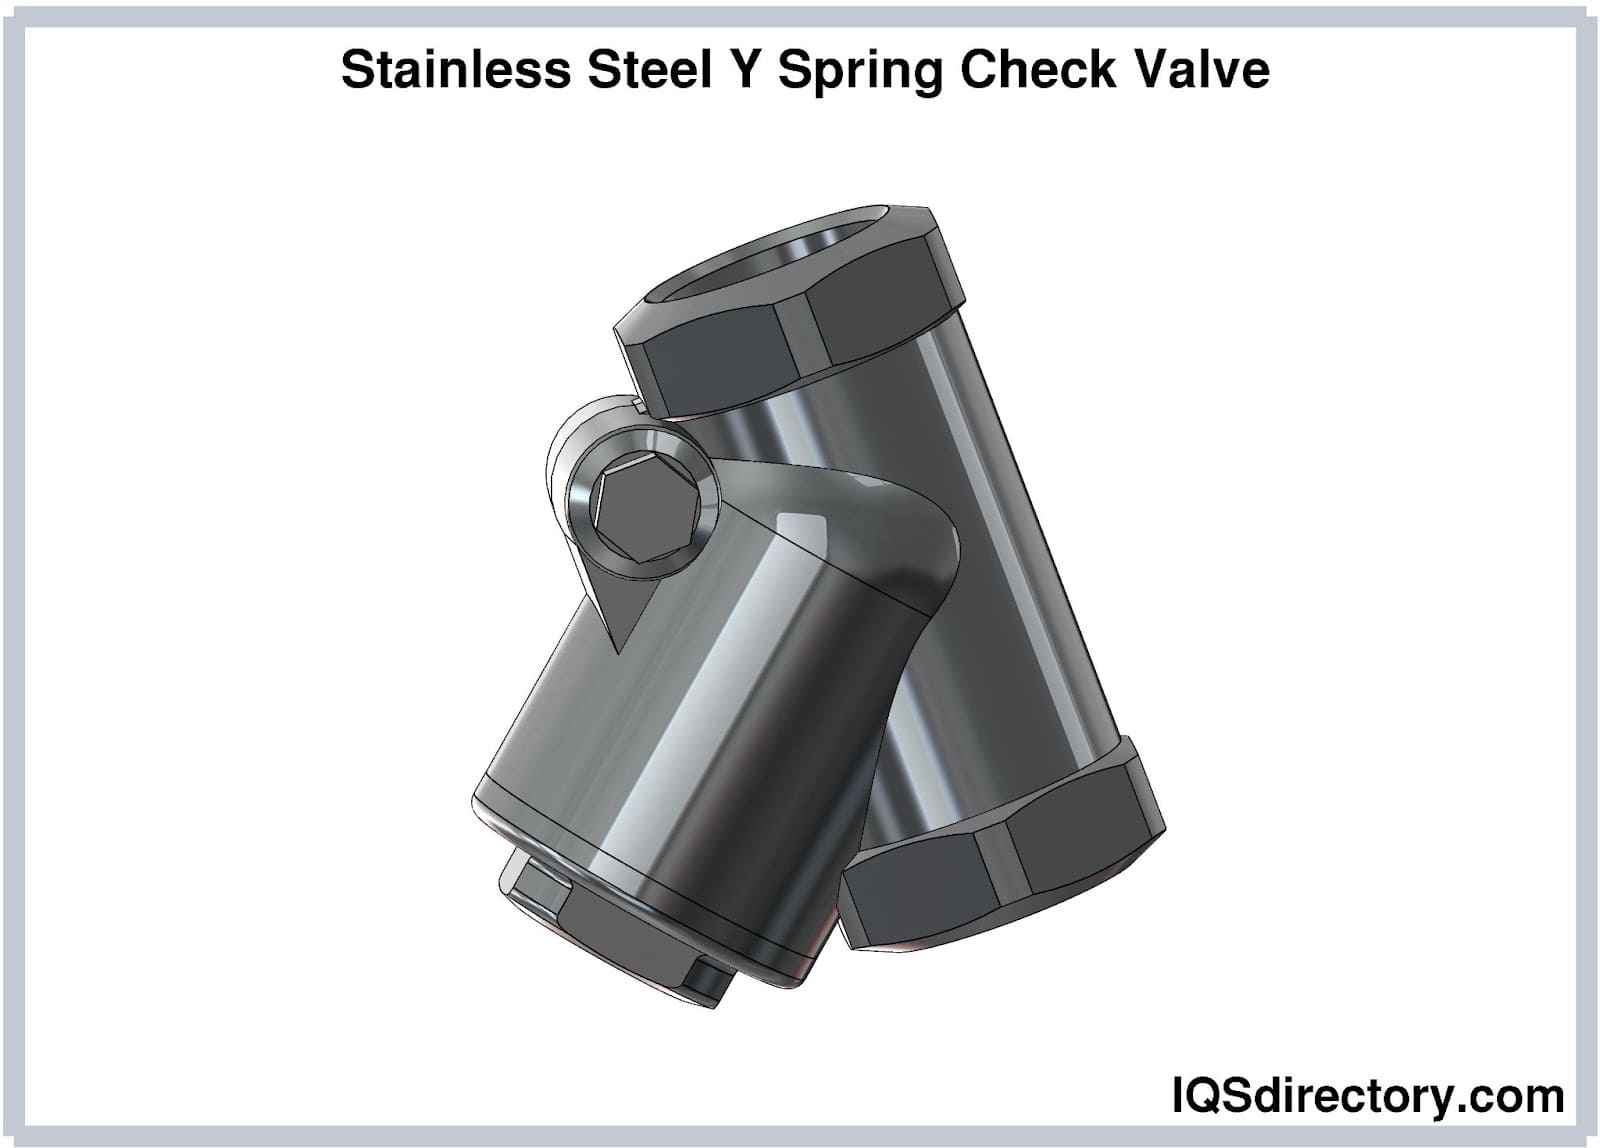 Stainless Steel Y Spring Check Valve